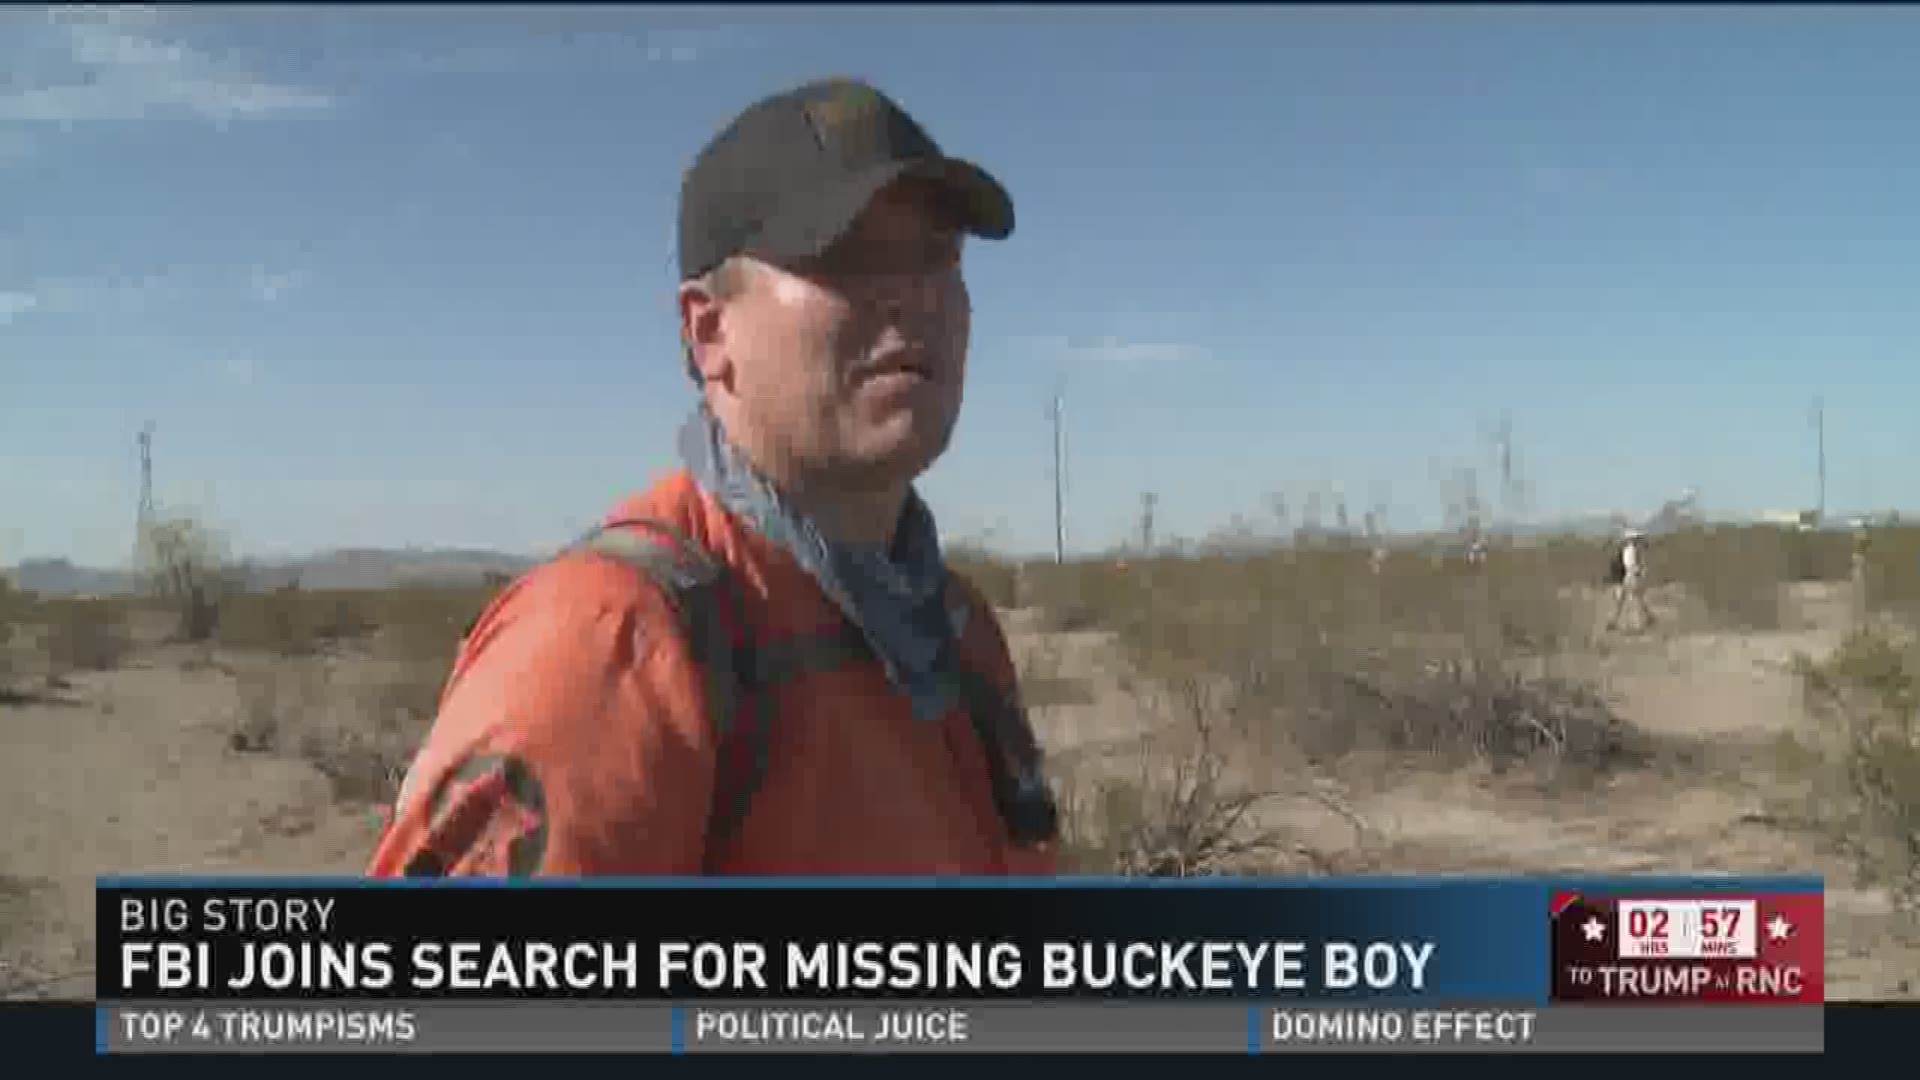 The FBI and the community are exhausting every option to find a missing 10-year-old boy.